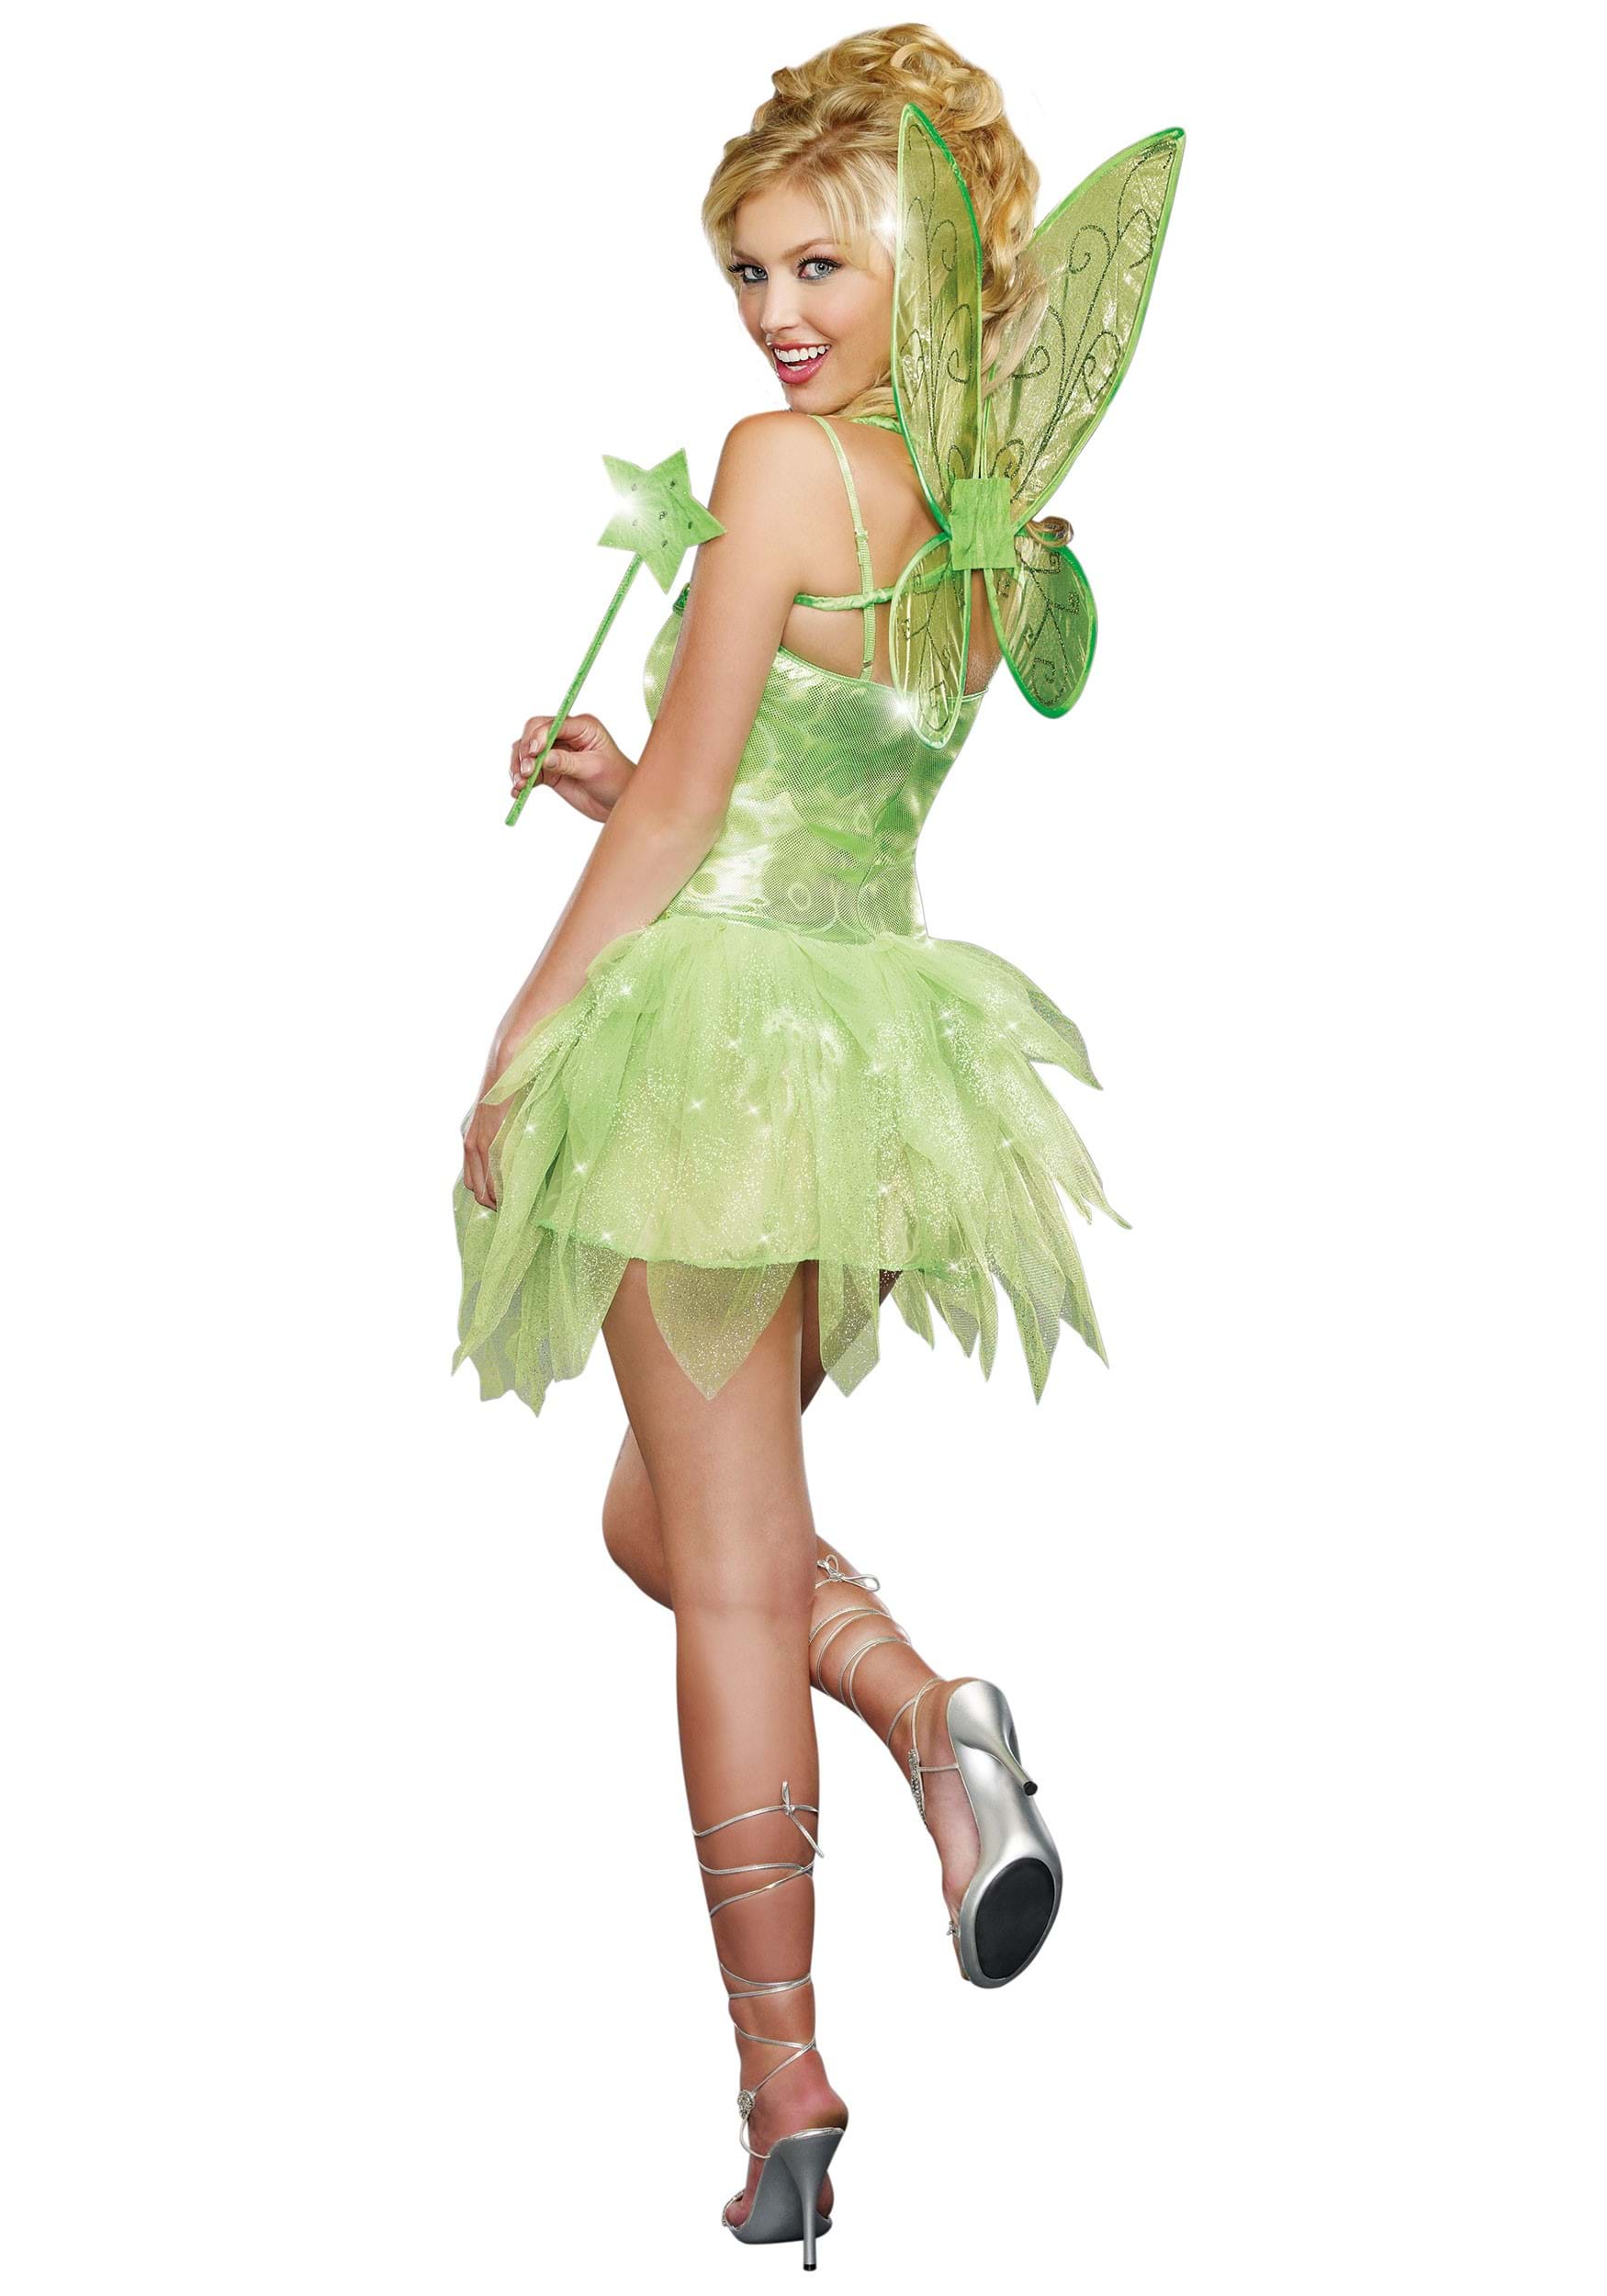 Fairy-Licious Costume For Women